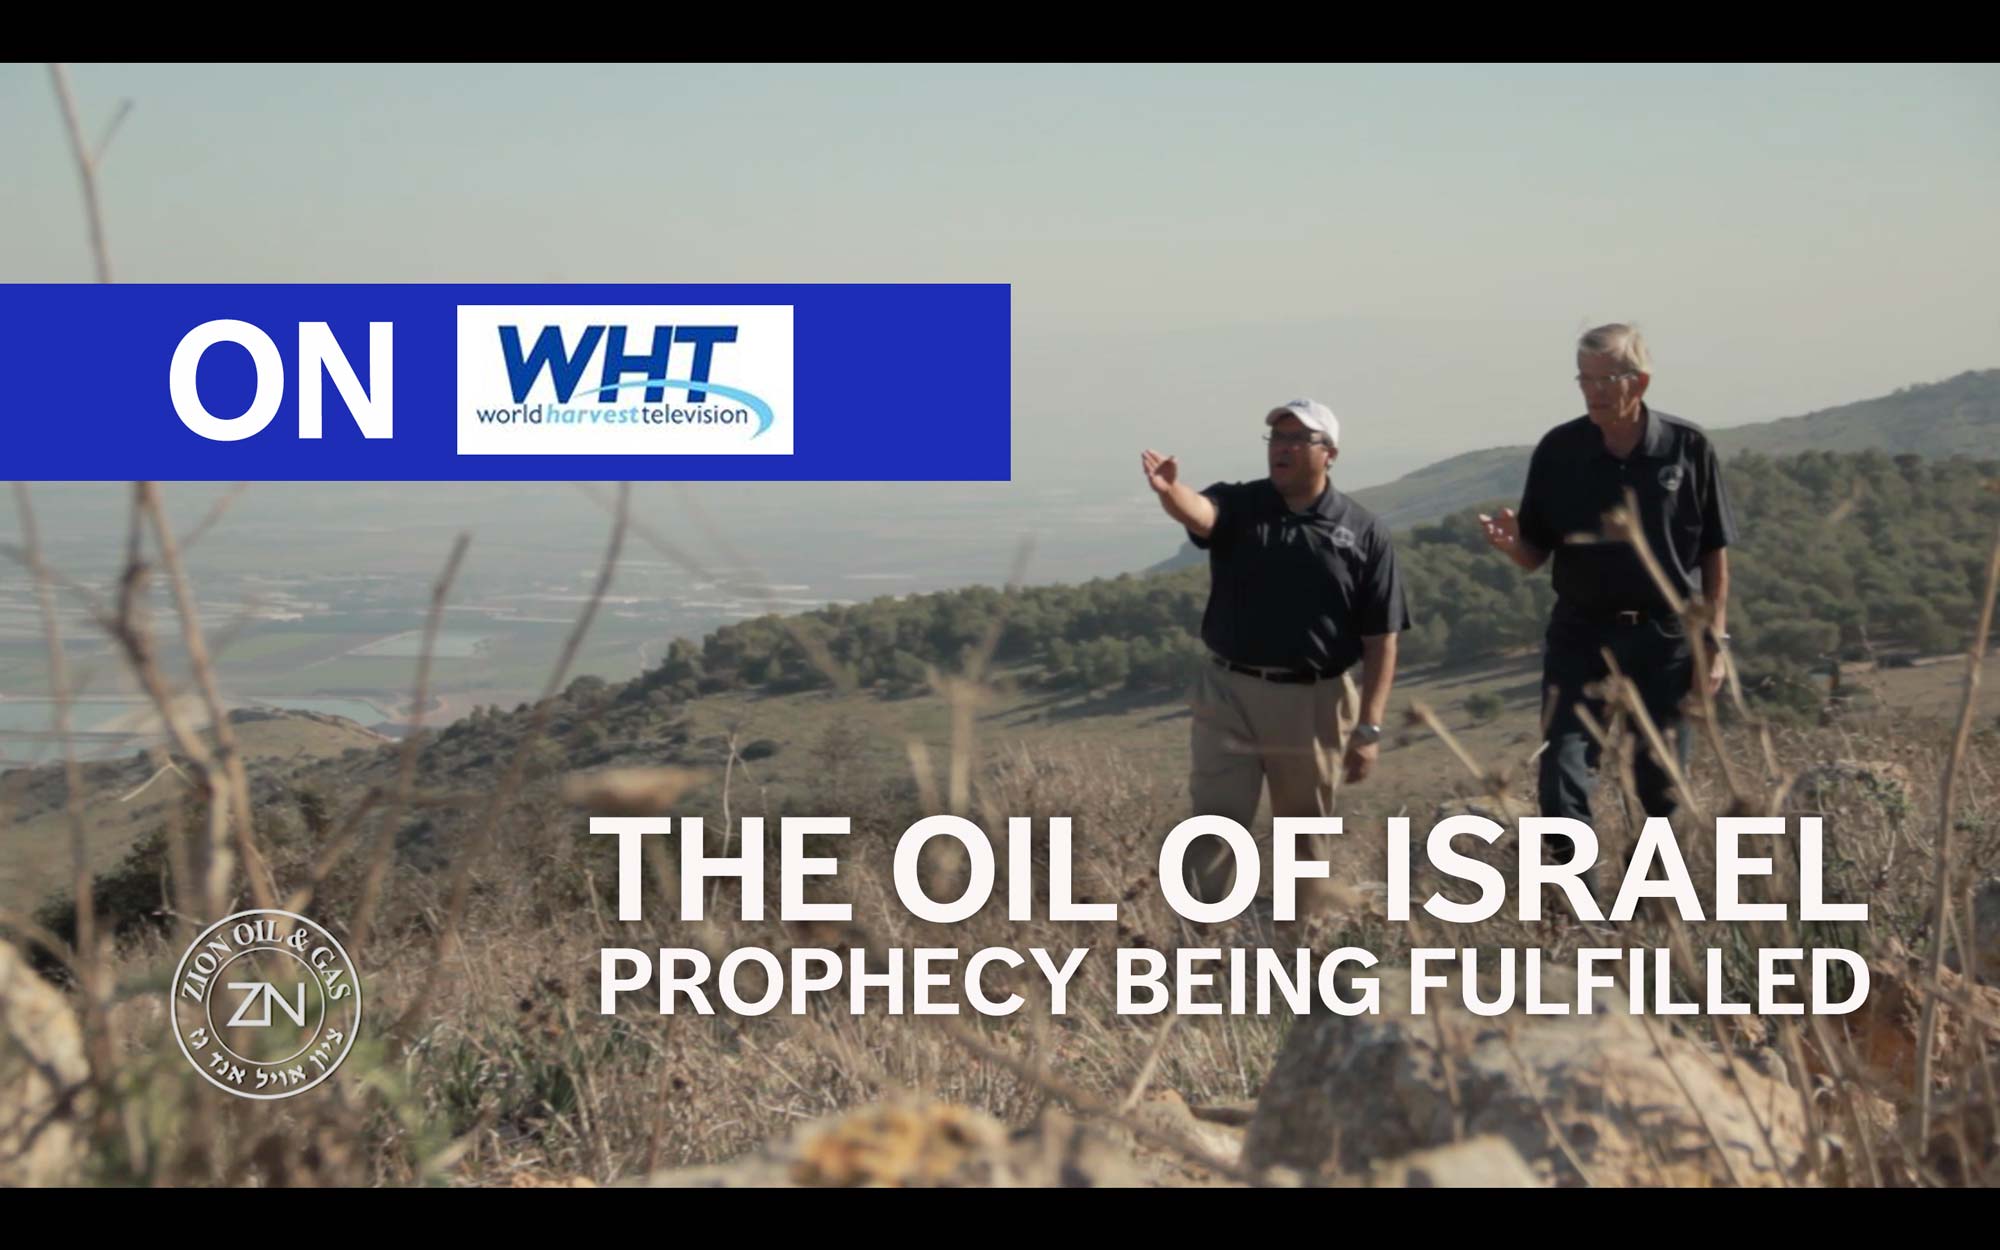 The Oil of Israel Prophecy Being Fulfilled on WHT LeSEA Broadcasting